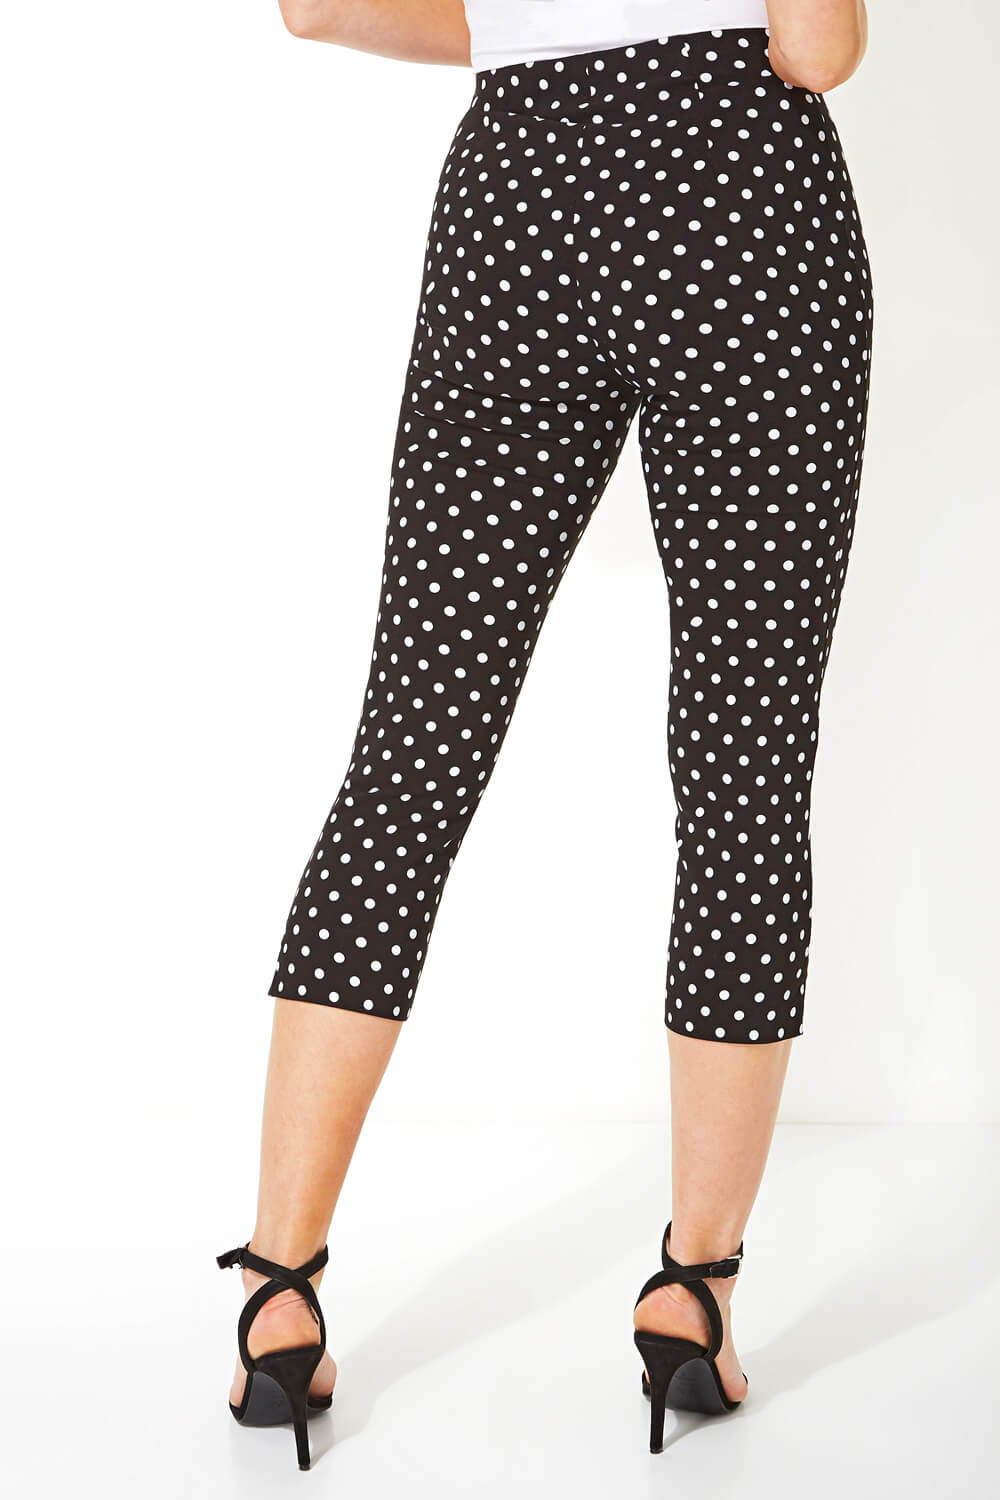 Black Spot Cropped Stretch Trousers, Image 3 of 5